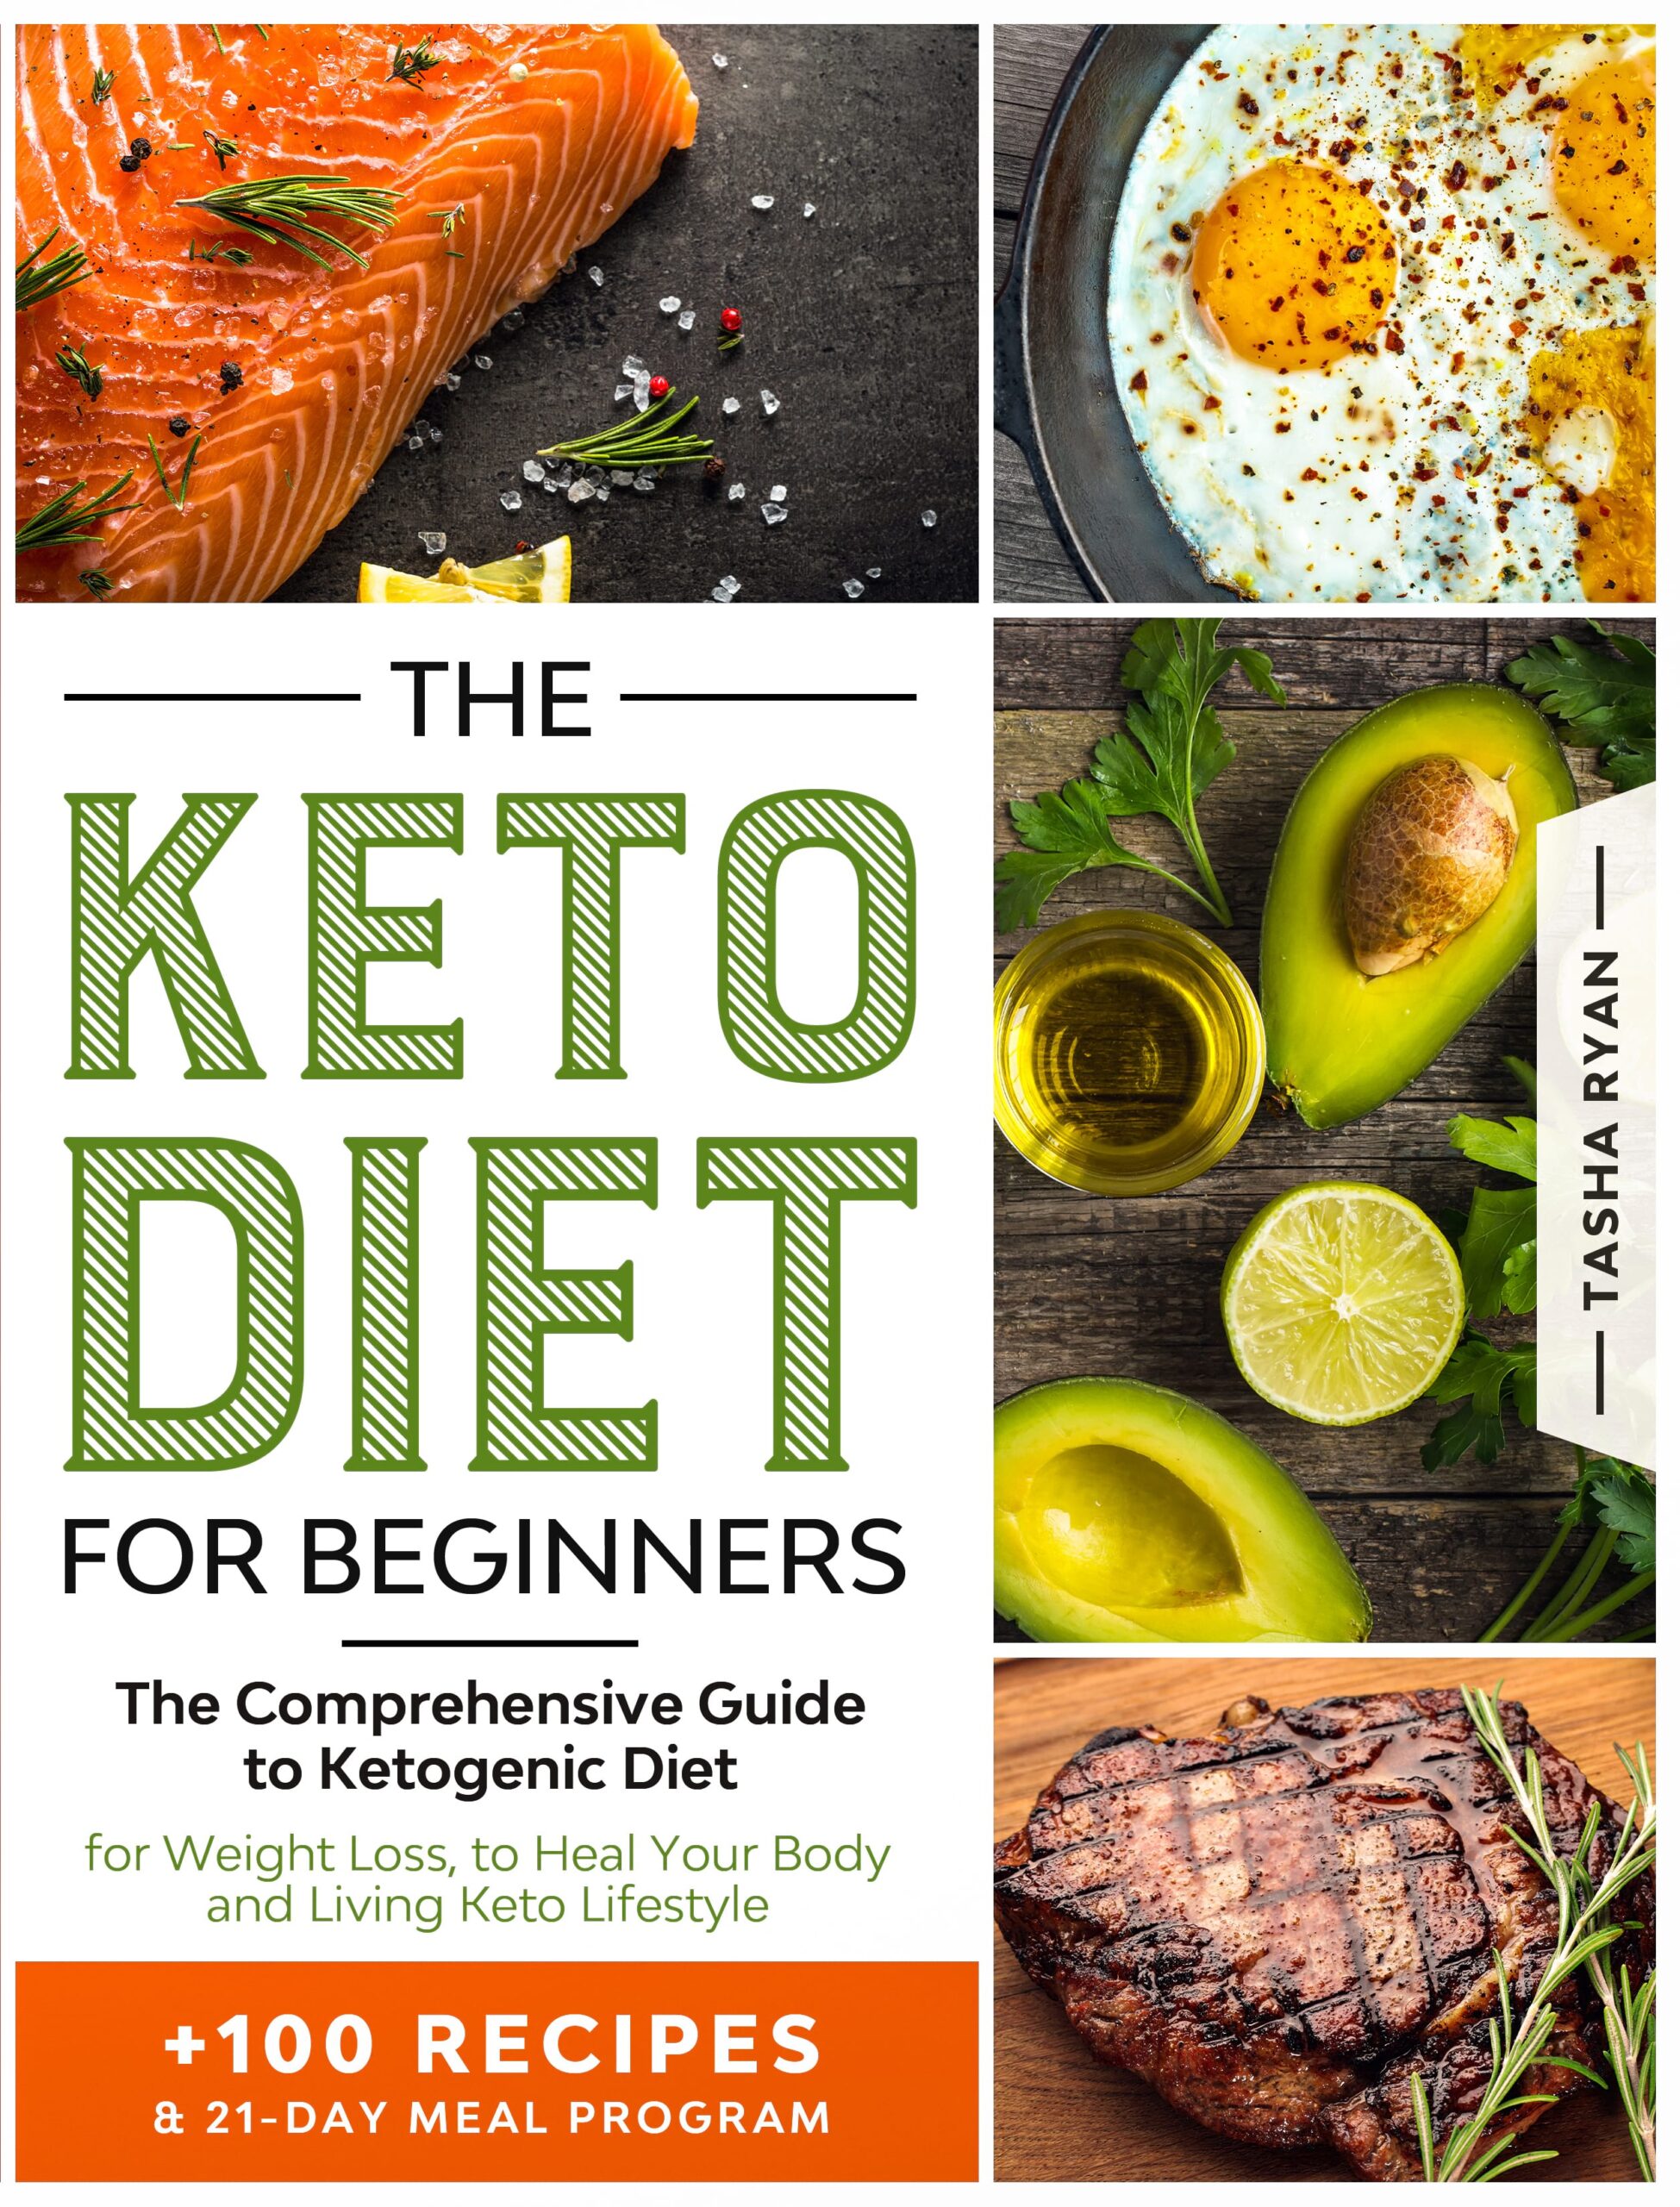 FREE: THE KETO DIET FOR BEGINNERS: The Comprehensive Guide to Ketogenic Diet for Weight Loss, to Heal Your Body and Living Keto Lifestyle PLUS 100 Keto Recipes & 21-Day Meal Plan Program by Tasha Ryan